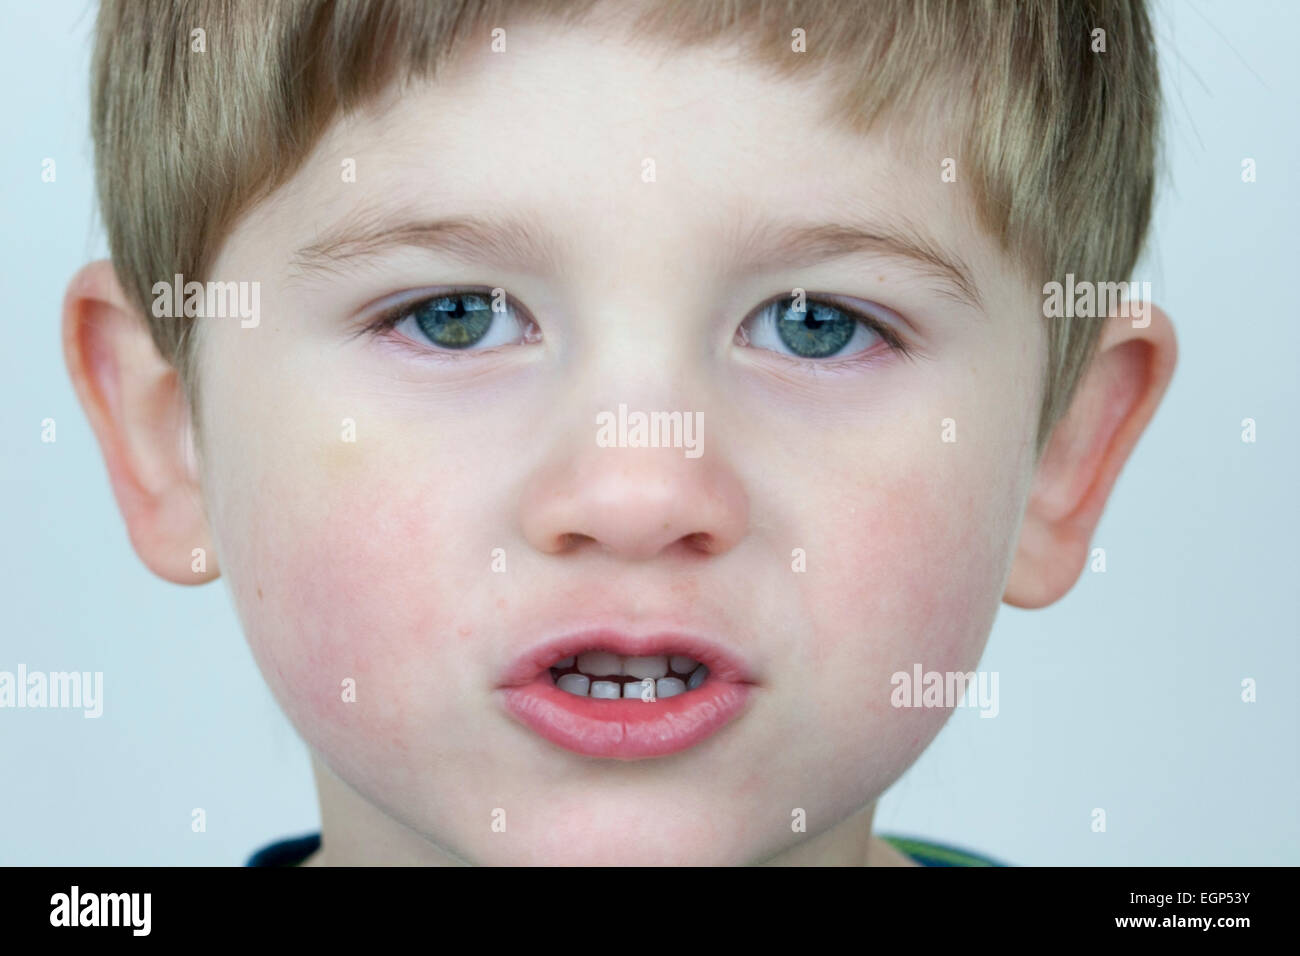 5 year old boy face shots close up talking expression Stock Photo